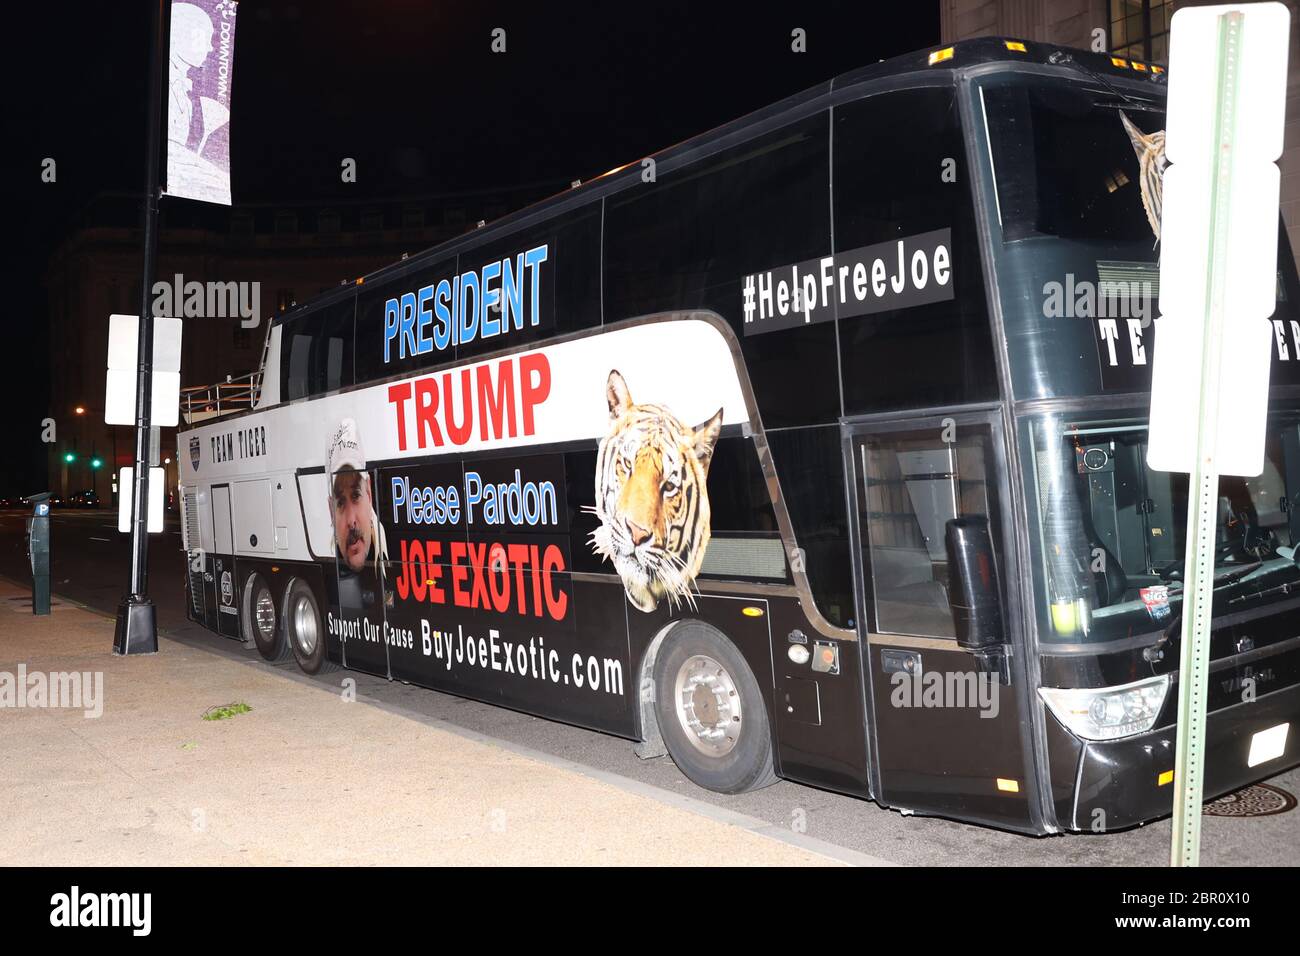 Washington, DC, USA. 19th May, 2020. Joe Exotic's legal team arrives in DC tonight in a bus with his likeness with hopes of getting a chance to see President Trump tomorrow morning and receive a pardon for Exotic. May 19, 2020 in Washington, DC Credit: Mpi34/Media Punch/Alamy Live News Stock Photo